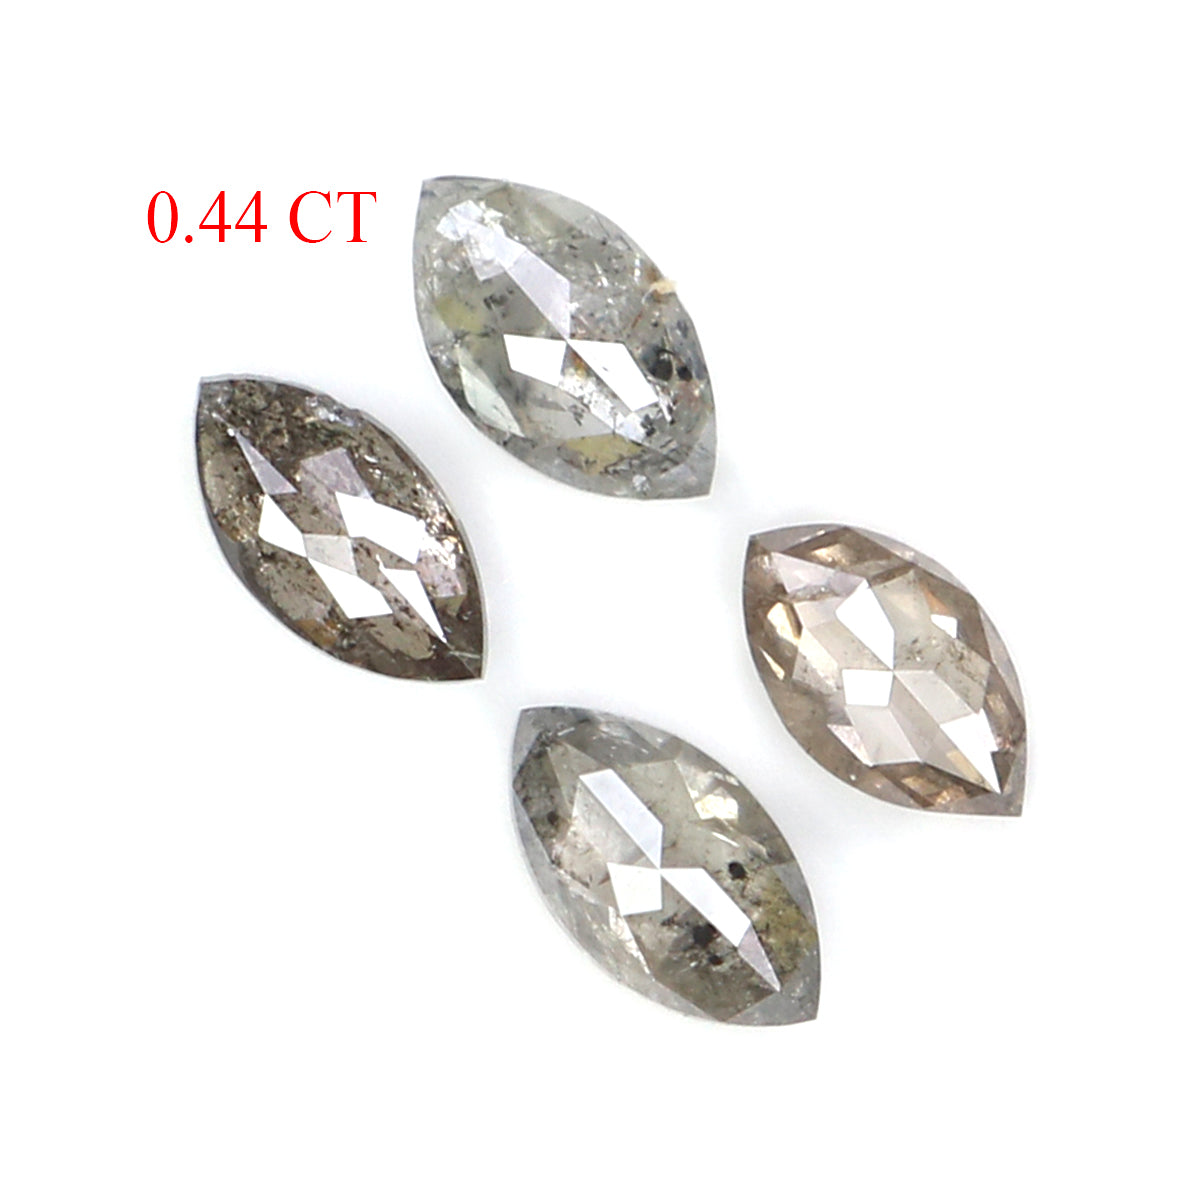 Natural Loose Marquise Diamond, Salt And Pepper Marquise Diamond, Natural Loose Diamond, Rose Cut Diamond, 0.44 CT Marquise Shape KR2659